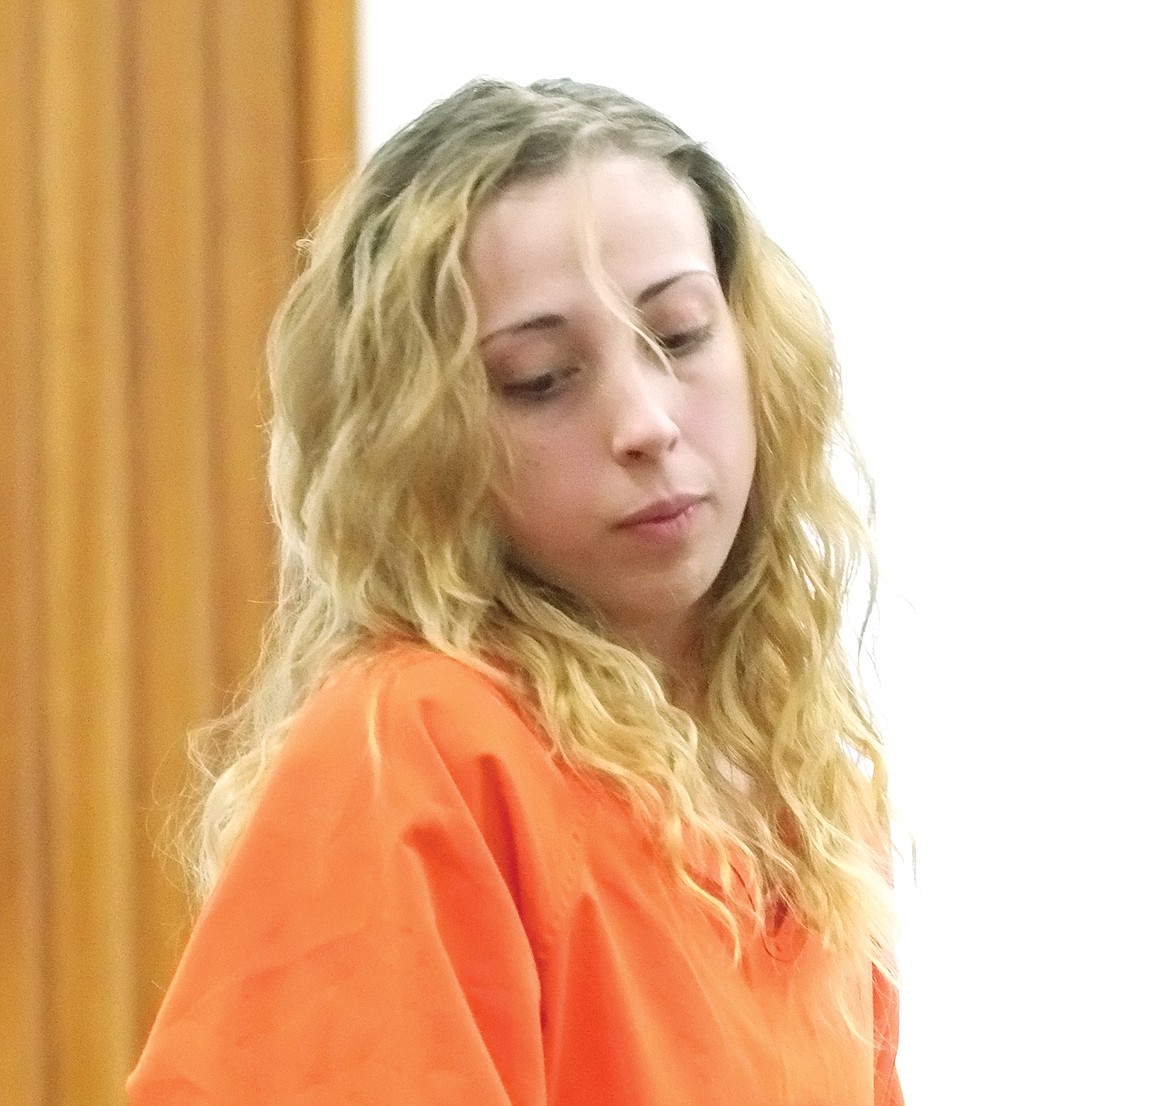 Patience Leah Patton arraignment, Tuesday, Feb. 20, 2018. (Paul Sievers/The Western News)